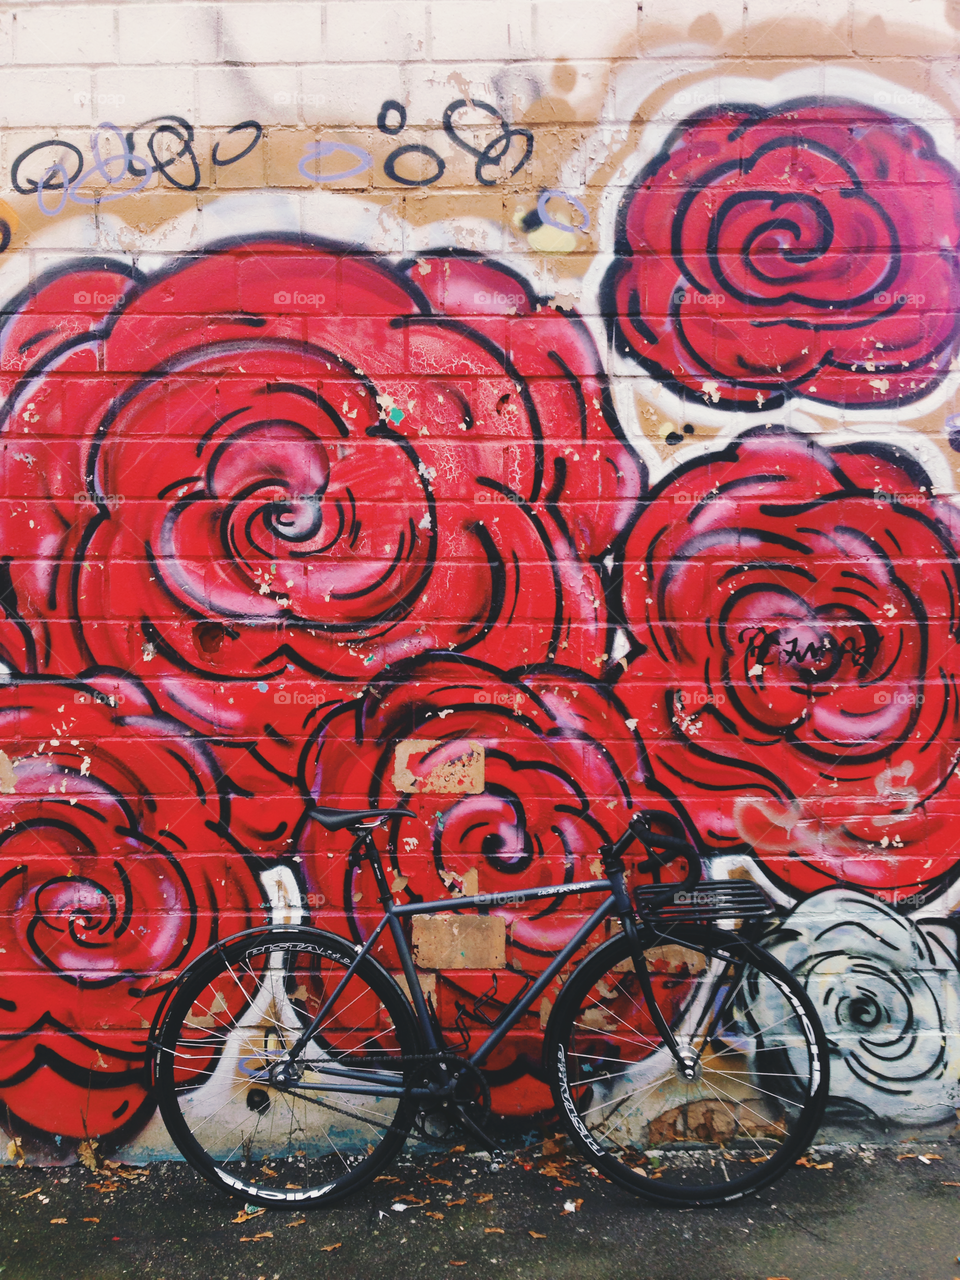 Grayish-black brakeless fixie bicycle standing in front of the wall decorated with bright red colored wallart graffiti with rose flowers